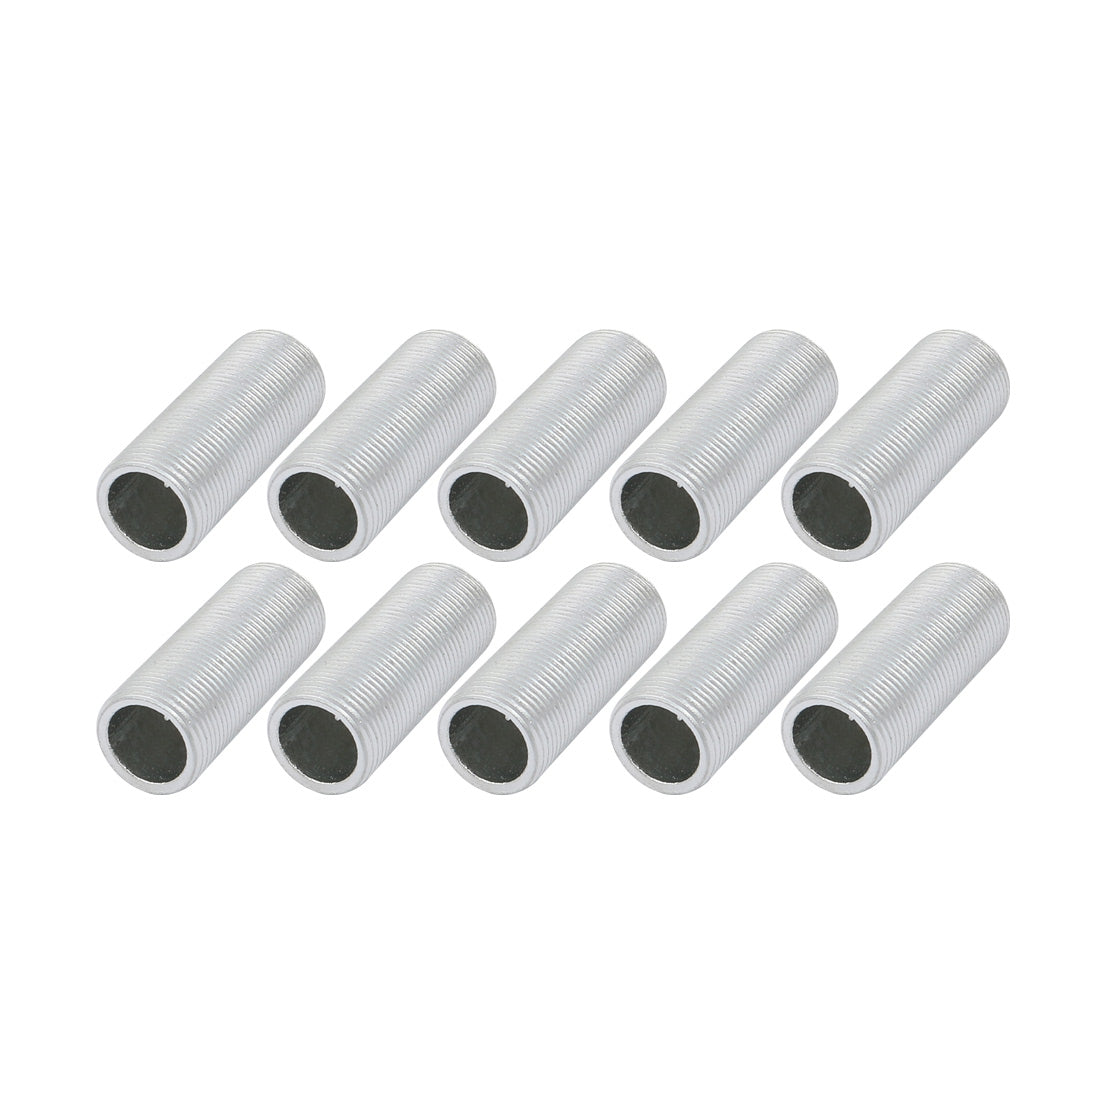 uxcell Uxcell 10 Pcs Metric M14 1mm Pitch Thread Zinc Plated Pipe Nipple Lamp Parts 35mm Long